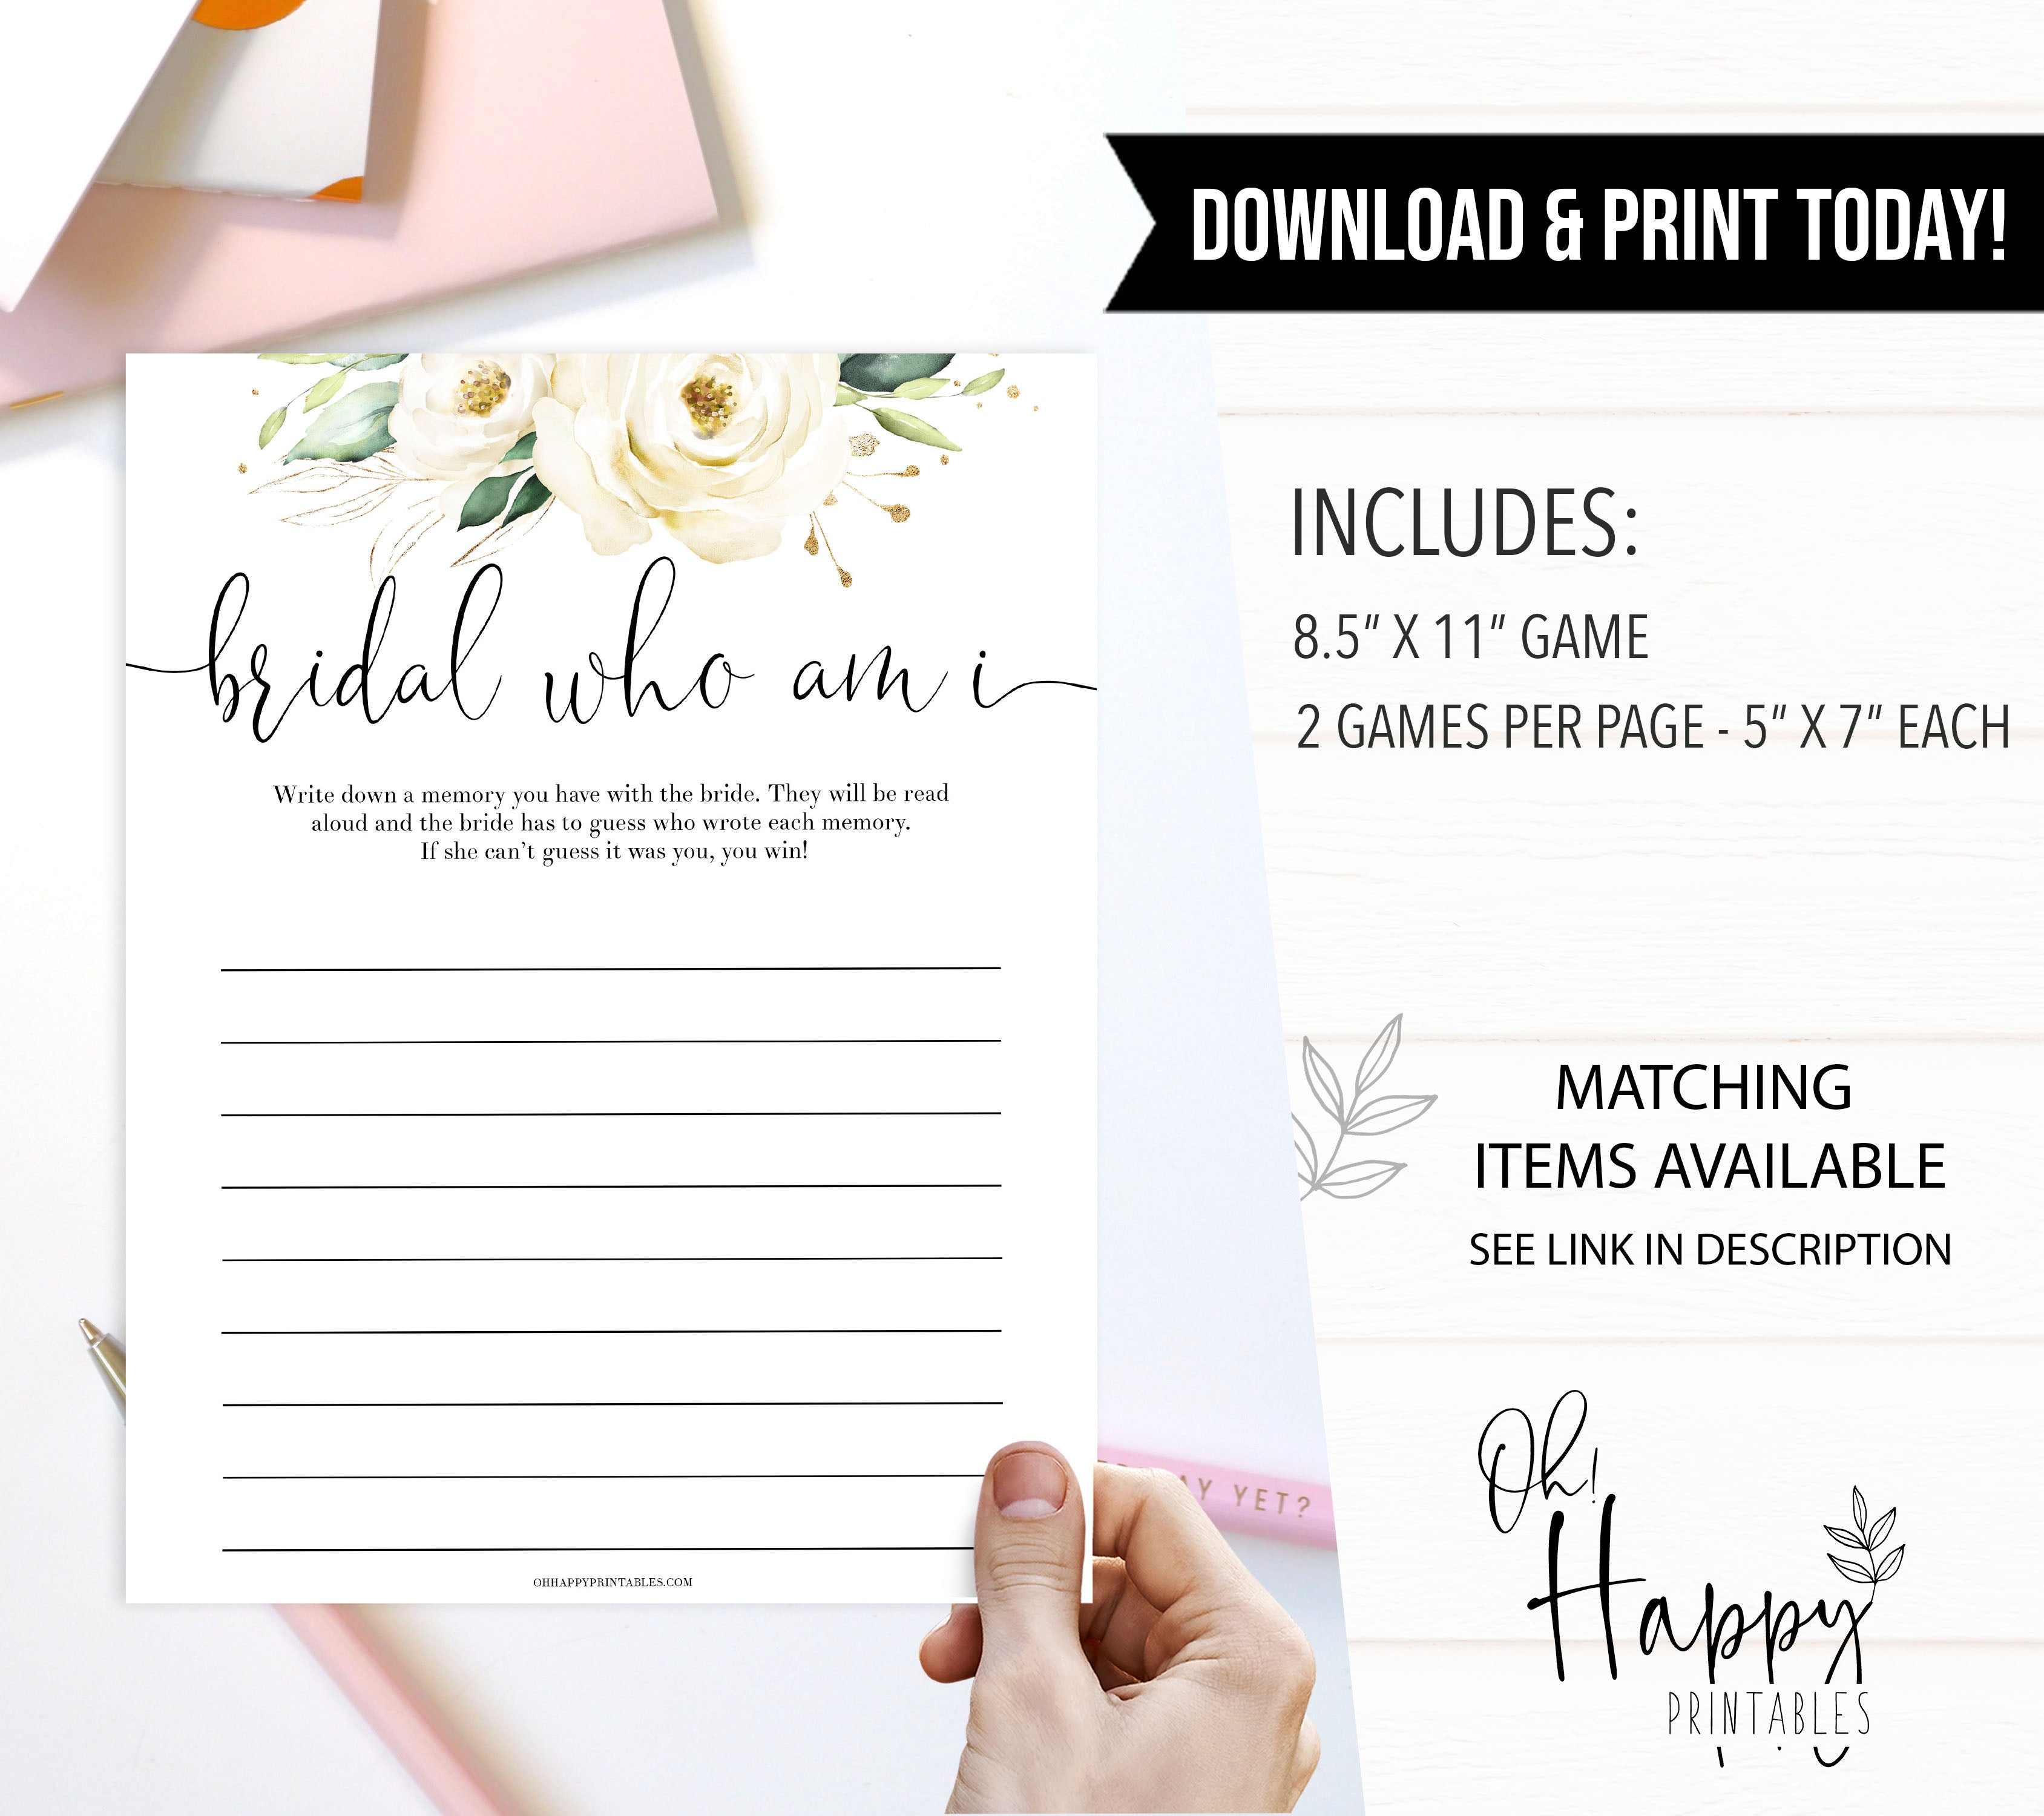 who am I guessing game, Printable bridal shower games, floral bridal shower, floral bridal shower games, fun bridal shower games, bridal shower game ideas, floral bridal shower